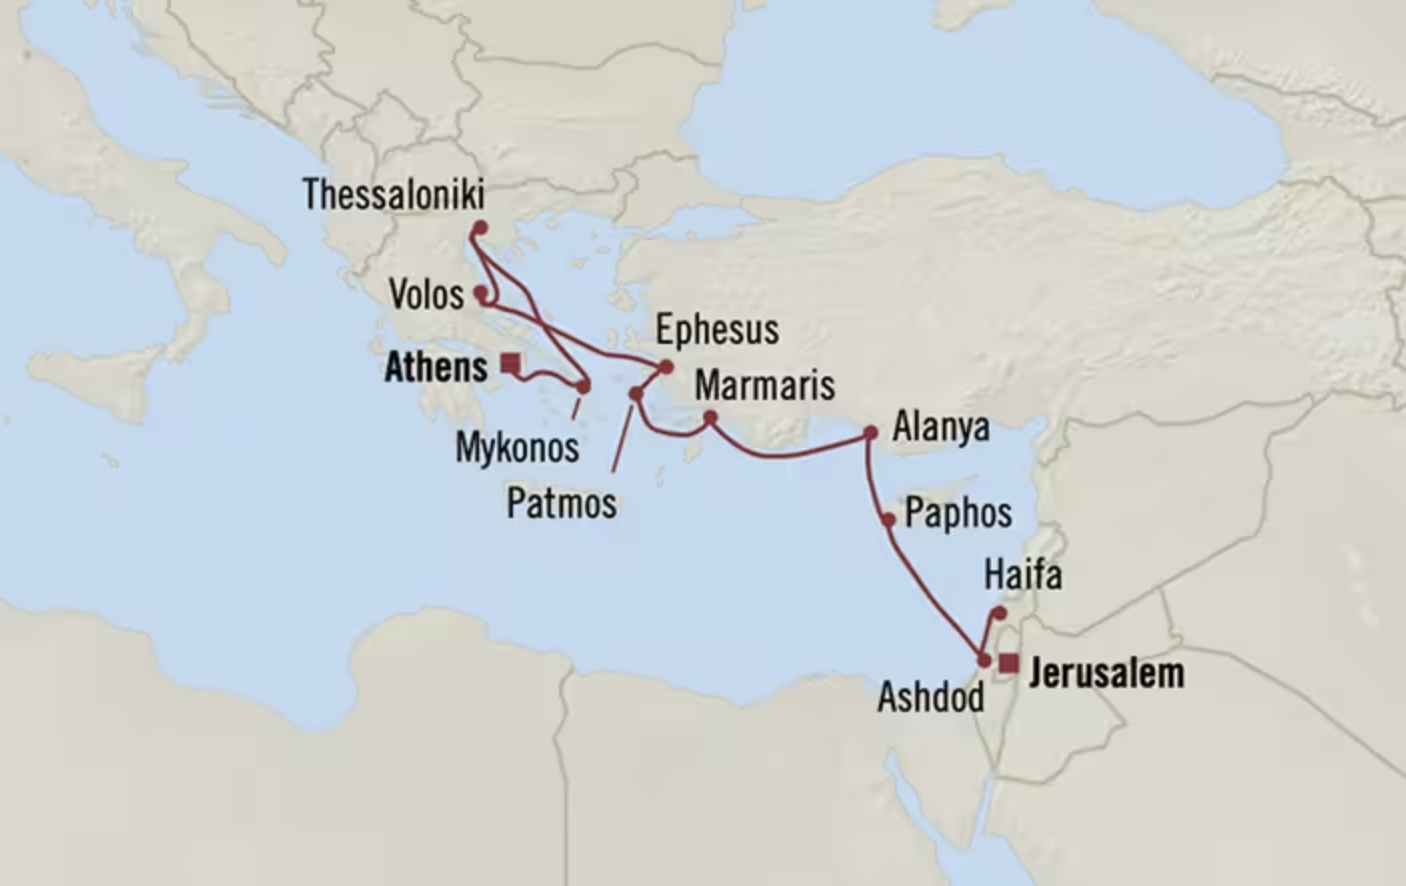 Map or route on this Eastern Mediterranean Voyage